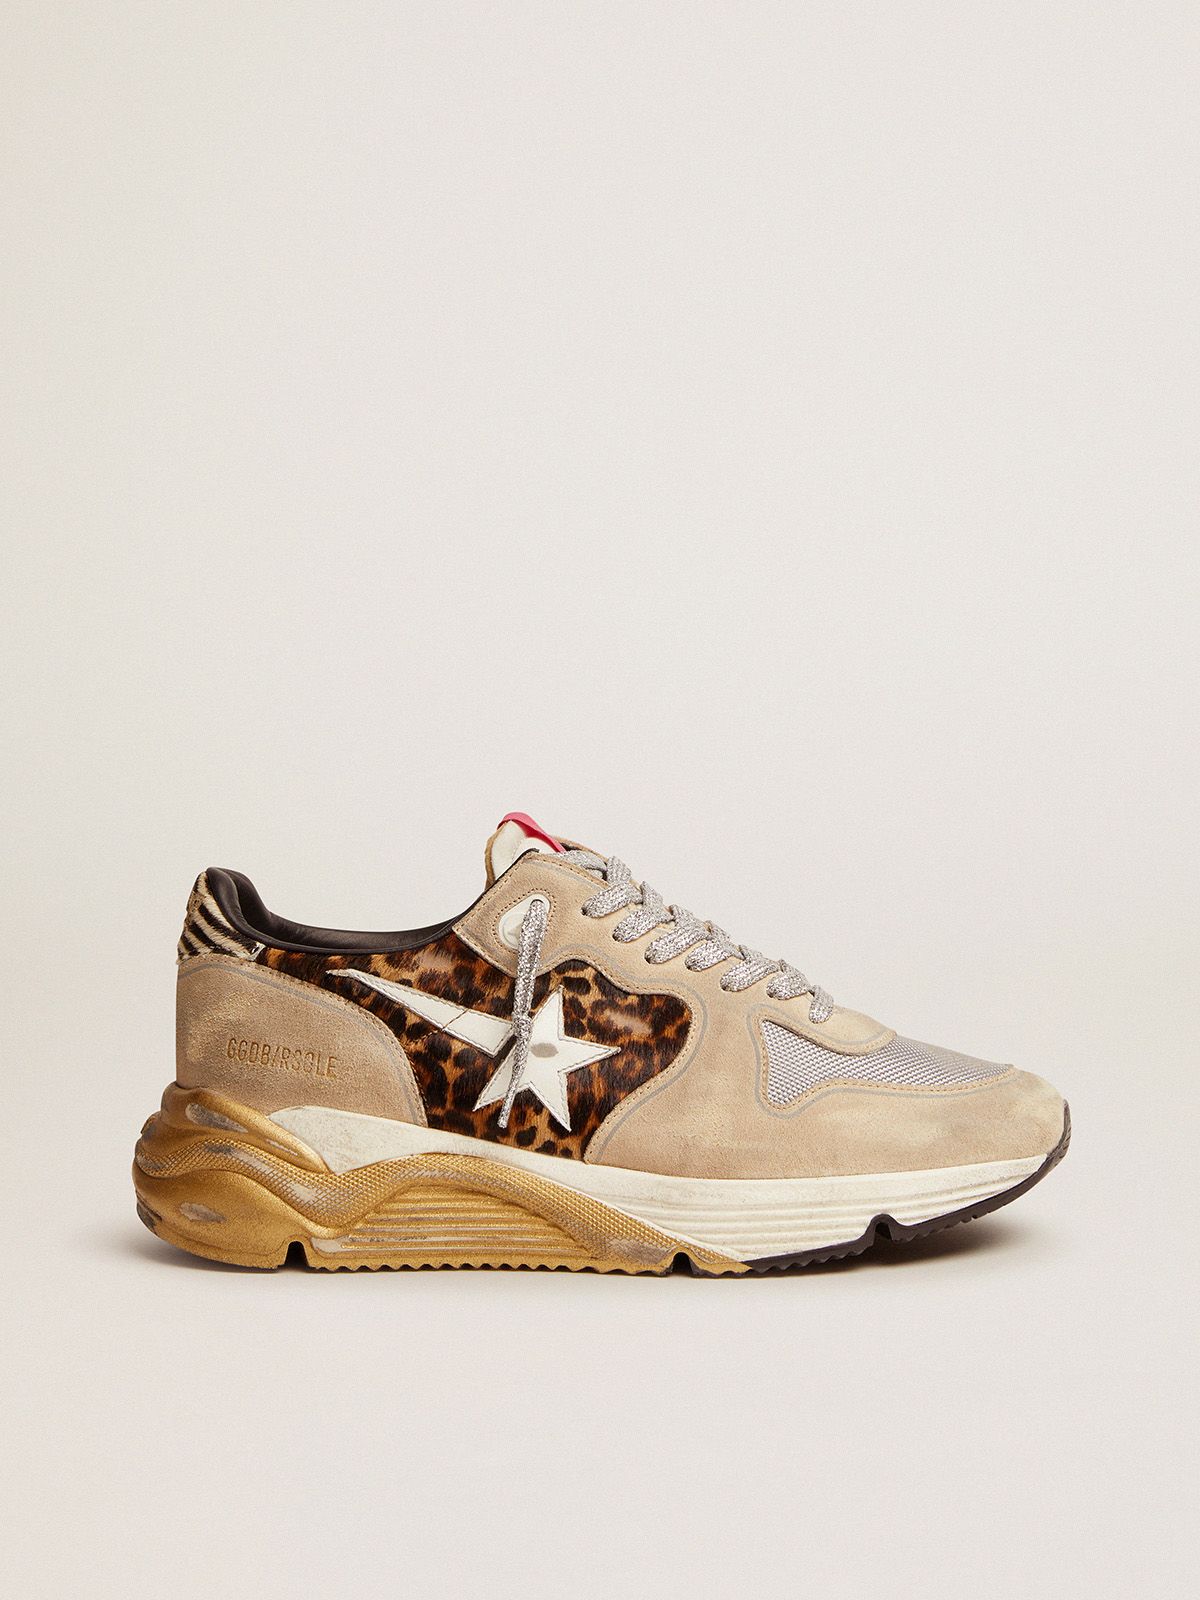 Golden Goose Ball Star Uomo Running Sole LTD sneakers in leopard-print pony skin and suede with mesh insert